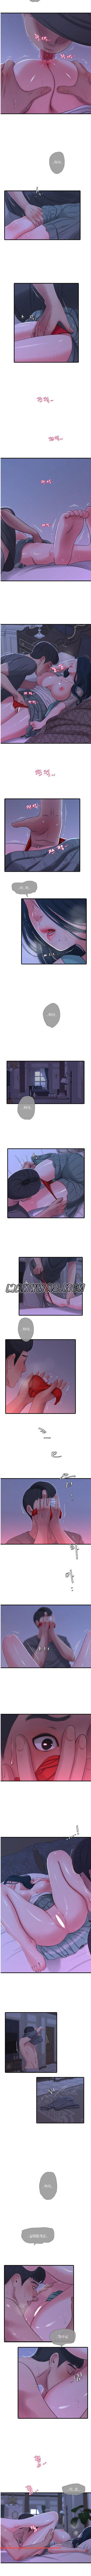 maidens-in-law-raw-chap-34-2